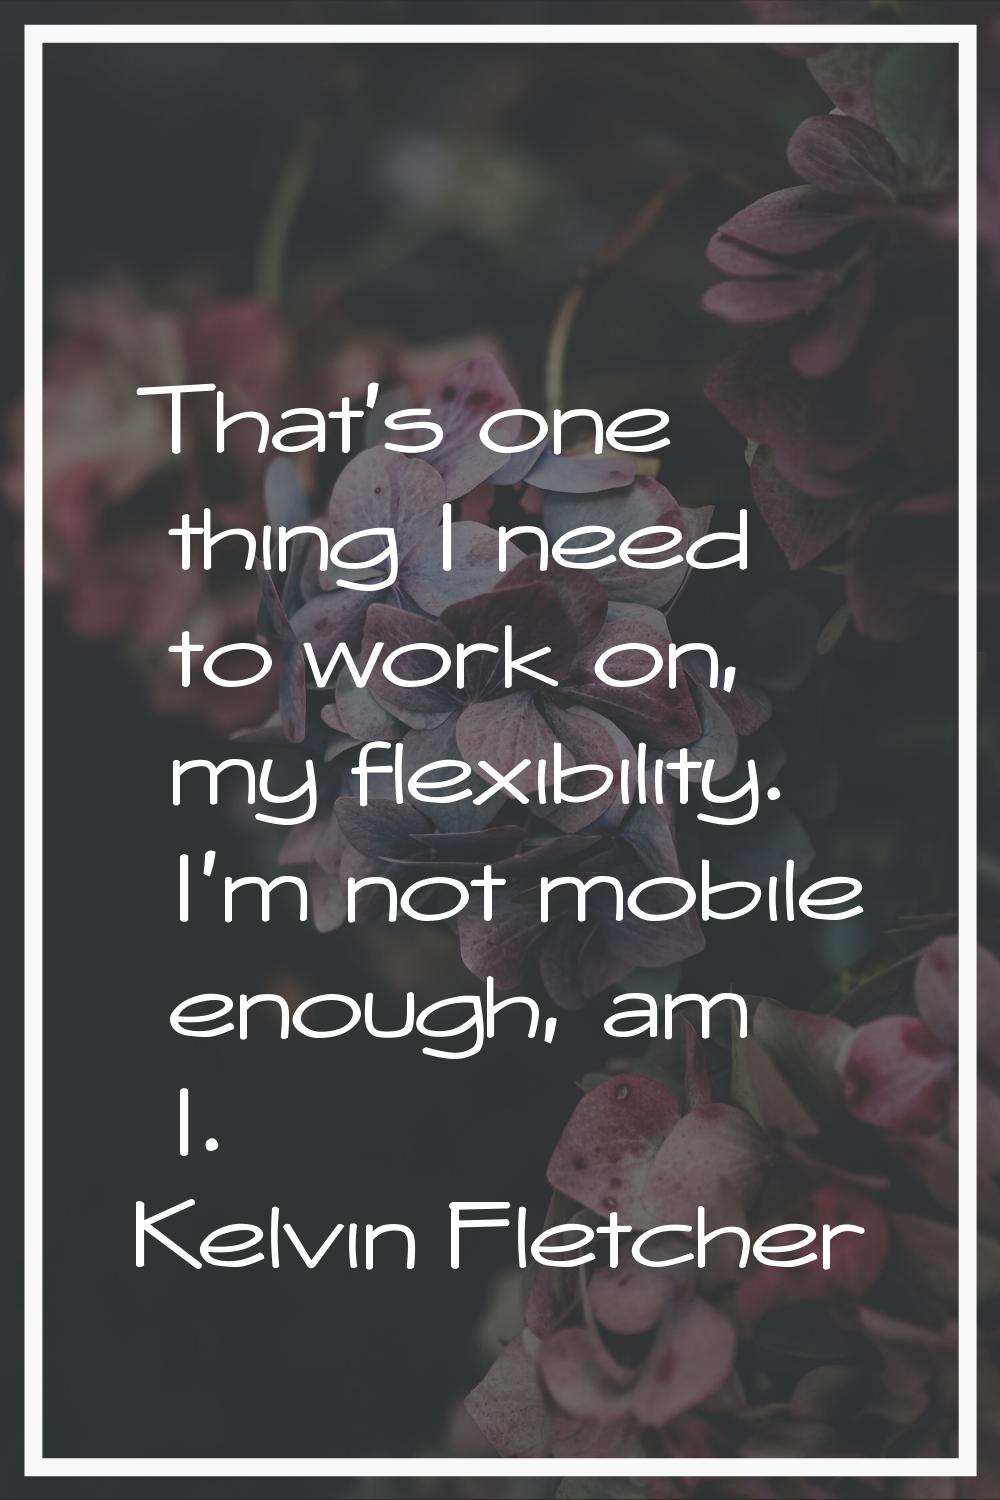 That's one thing I need to work on, my flexibility. I'm not mobile enough, am I.